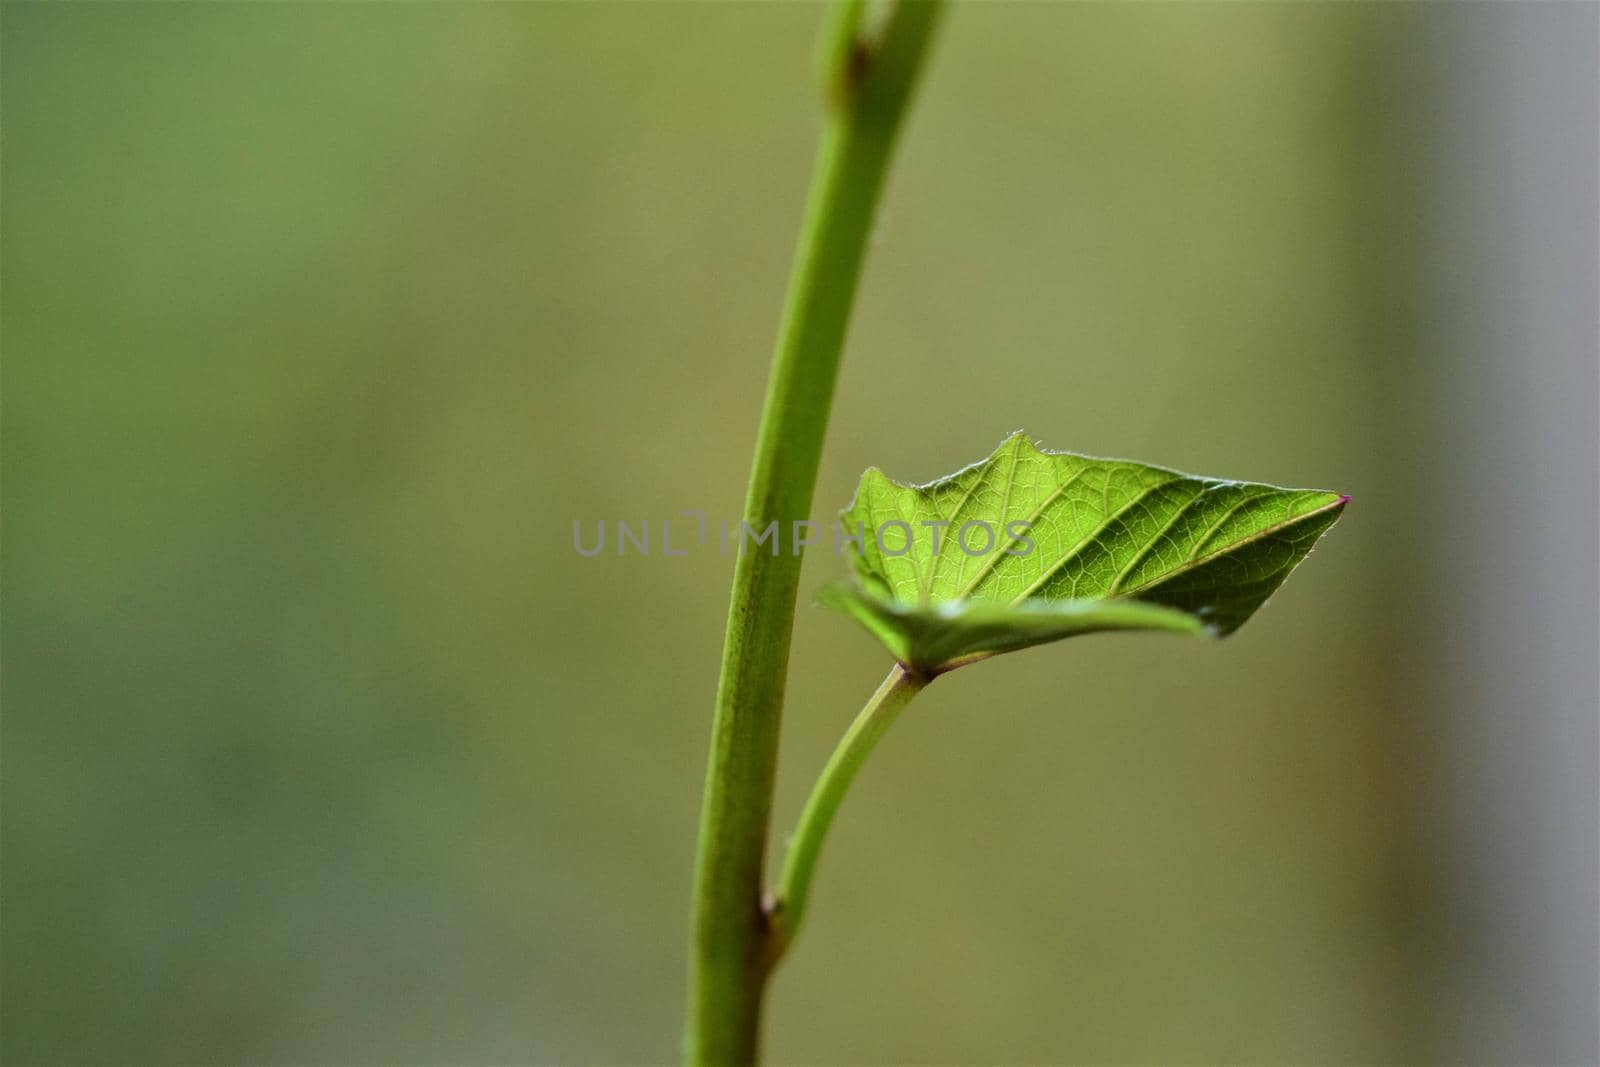 Close up of the green leave of a sweet potato against agreen blurred background by Luise123